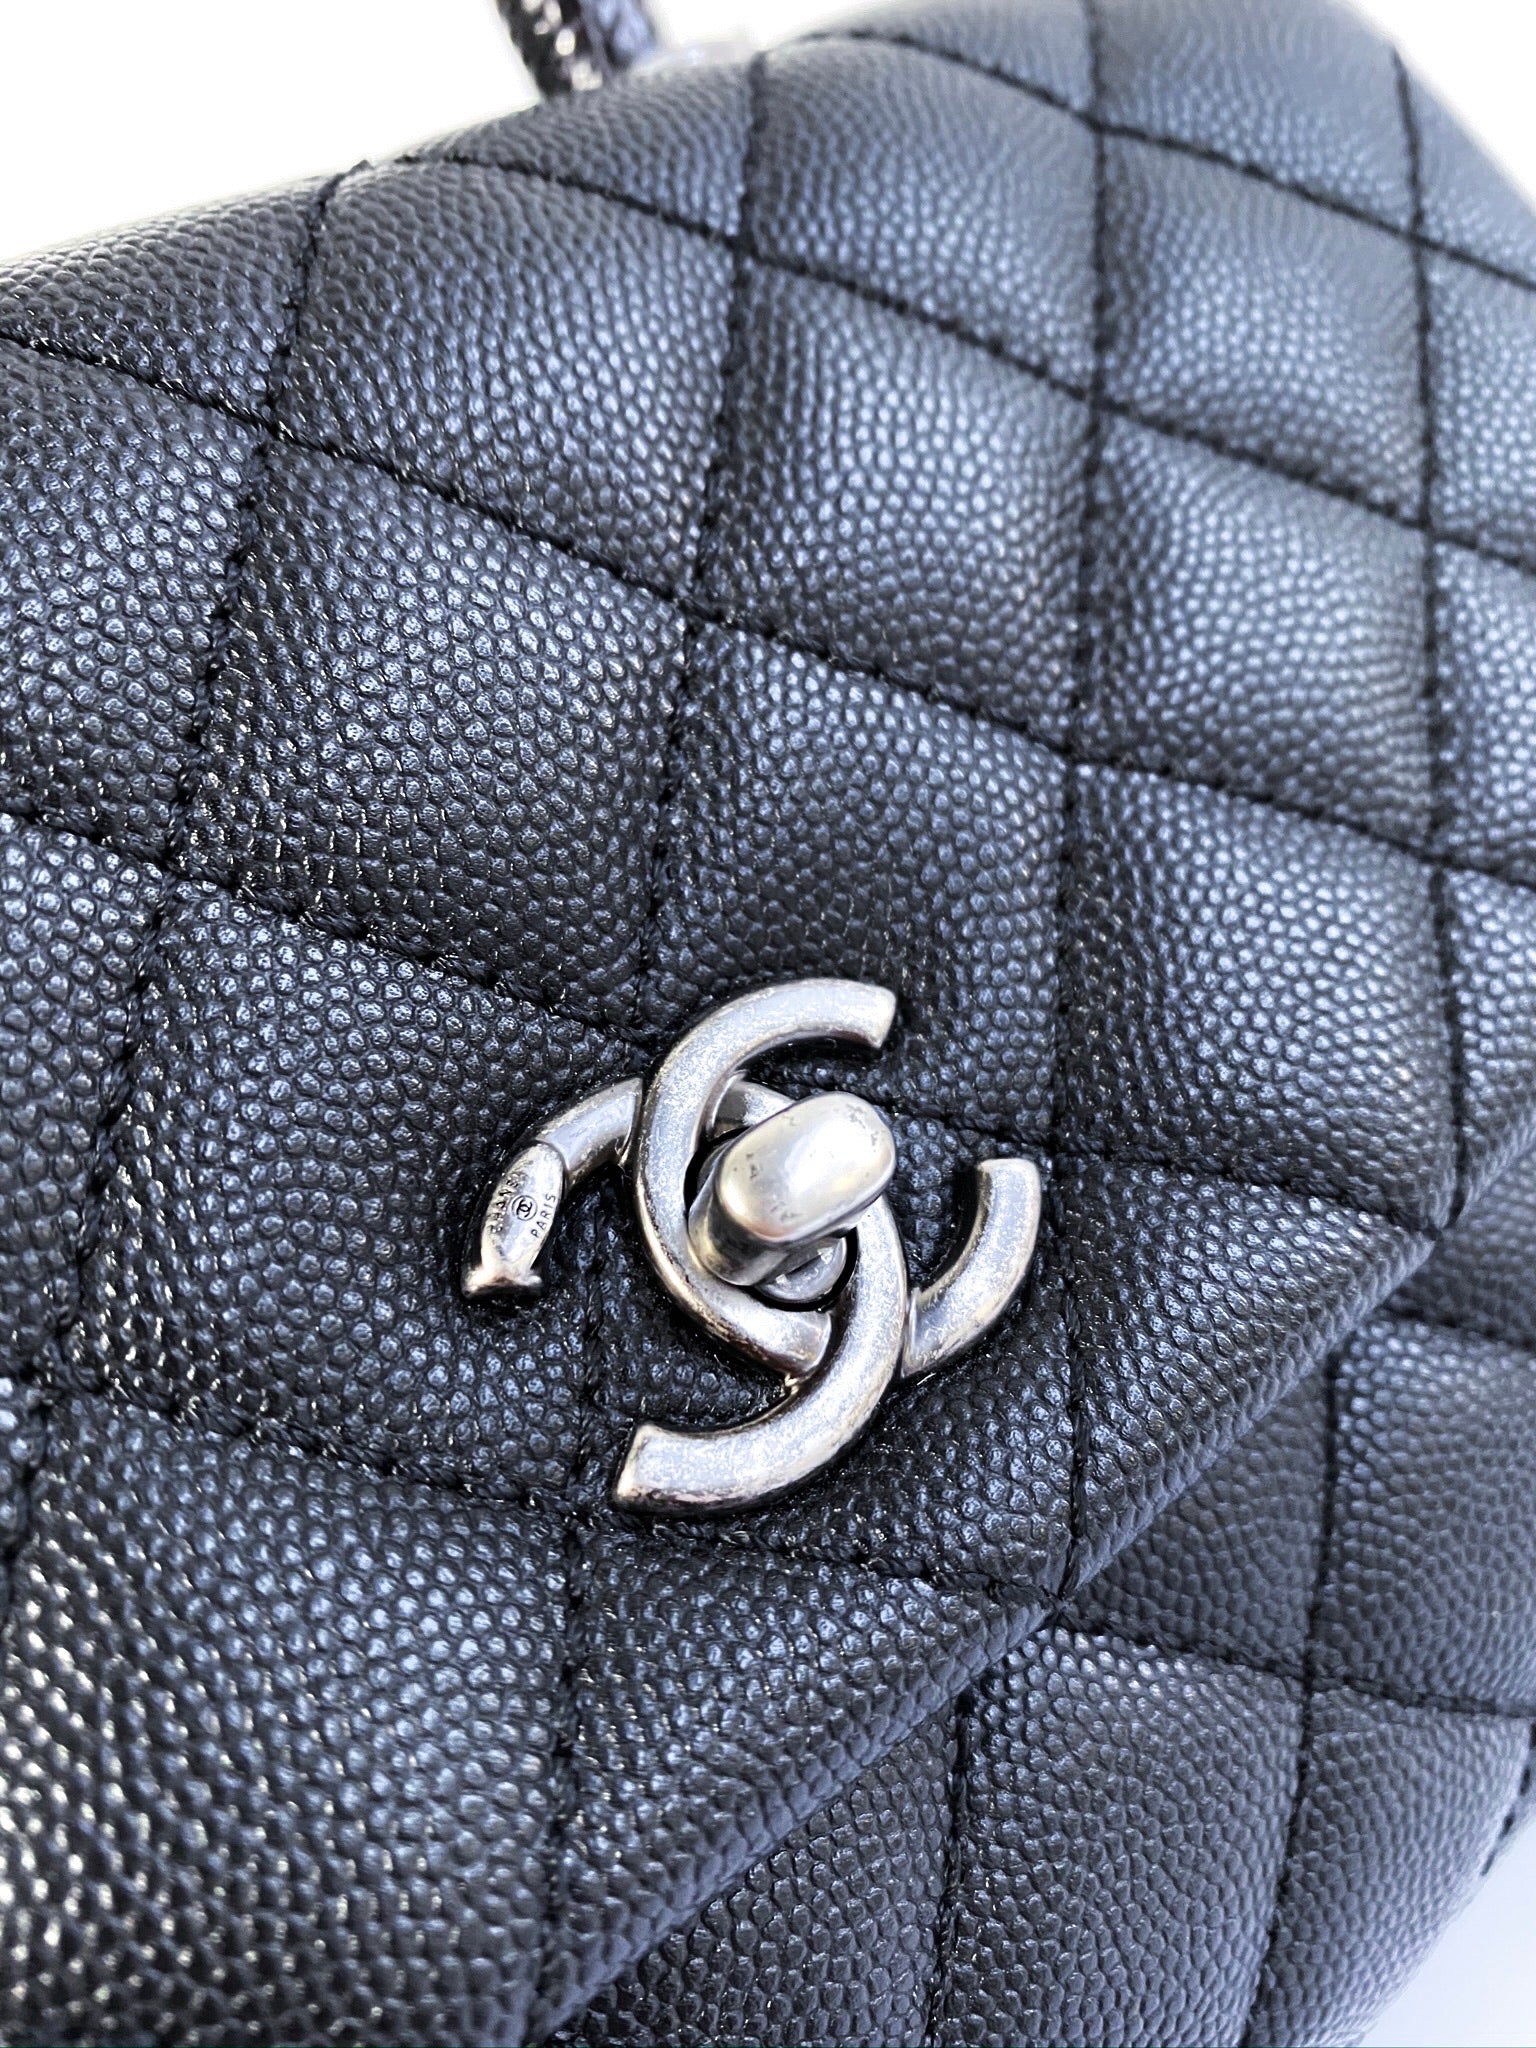 SOLD Chanel Coco Lizard Handle with RHW in Medium size 10.5”. - Reetzy